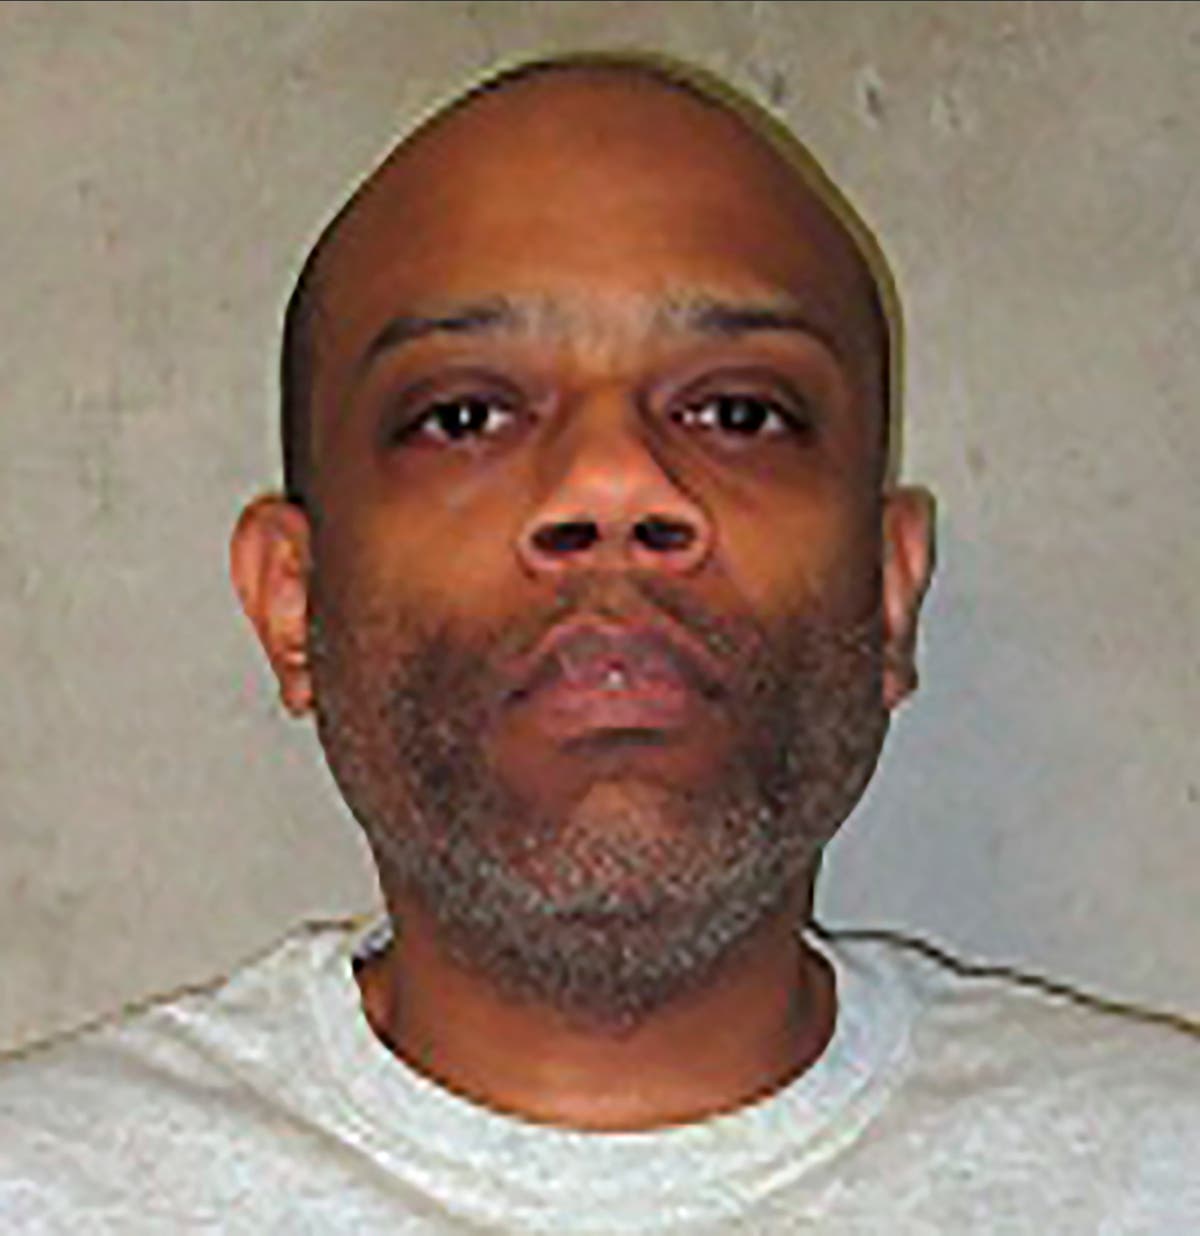 Oklahoma executes disabled Black man by lethal injection despite lawsuit